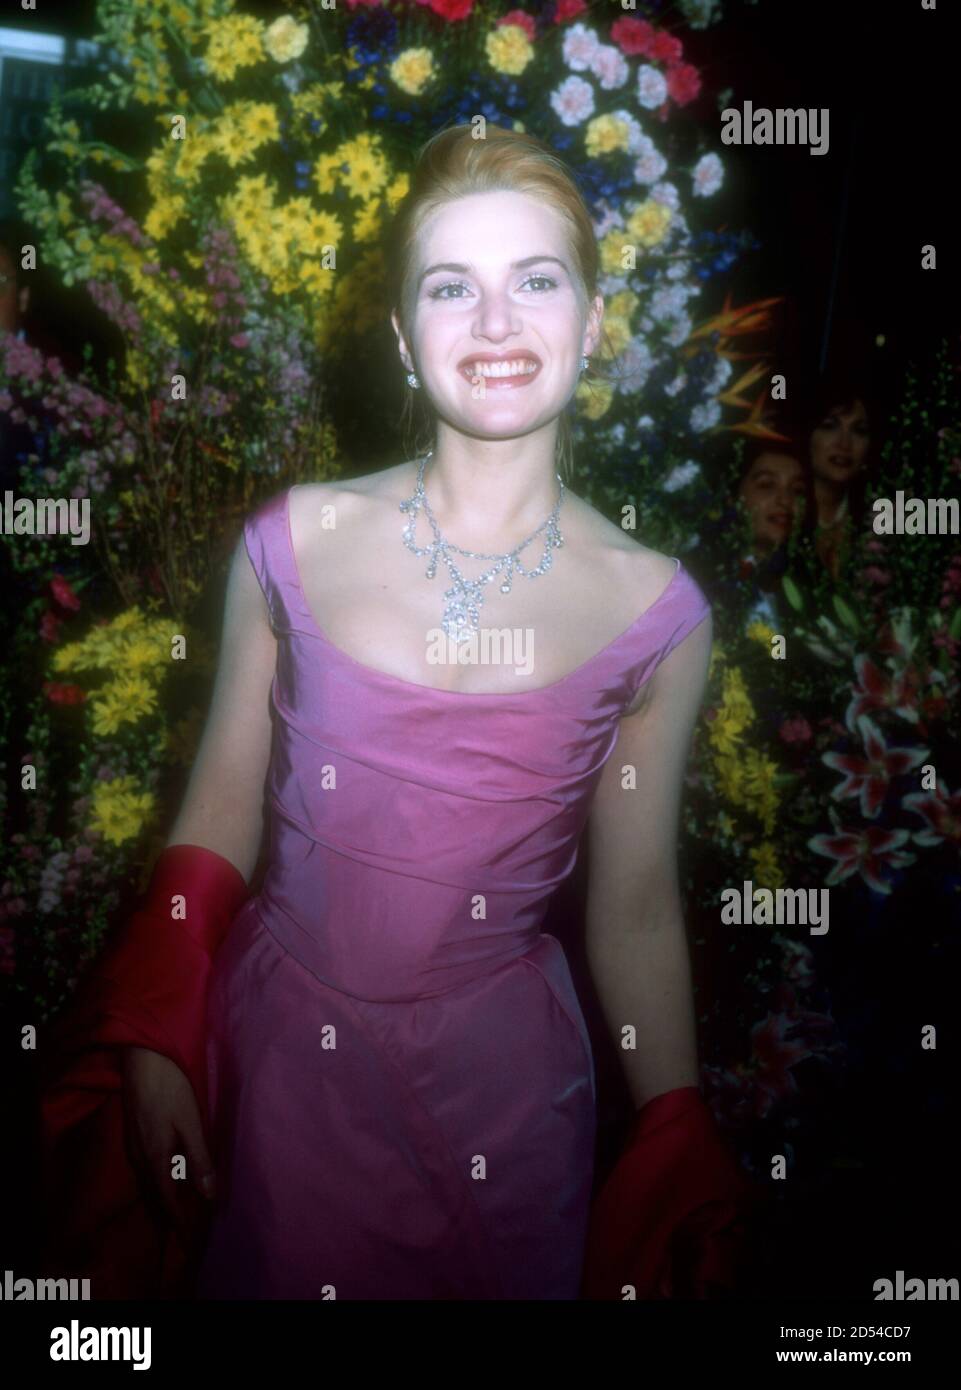 Los Angeles, California, USA 25th March 1996 Actress Kate Winslet attends the 68th Annual Academy Awards at Dorothy Chandler Pavilioin on March 25, 1996 in Los Angeles, California, USA. Photo by Barry King/Alamy Stock Photo Stock Photo